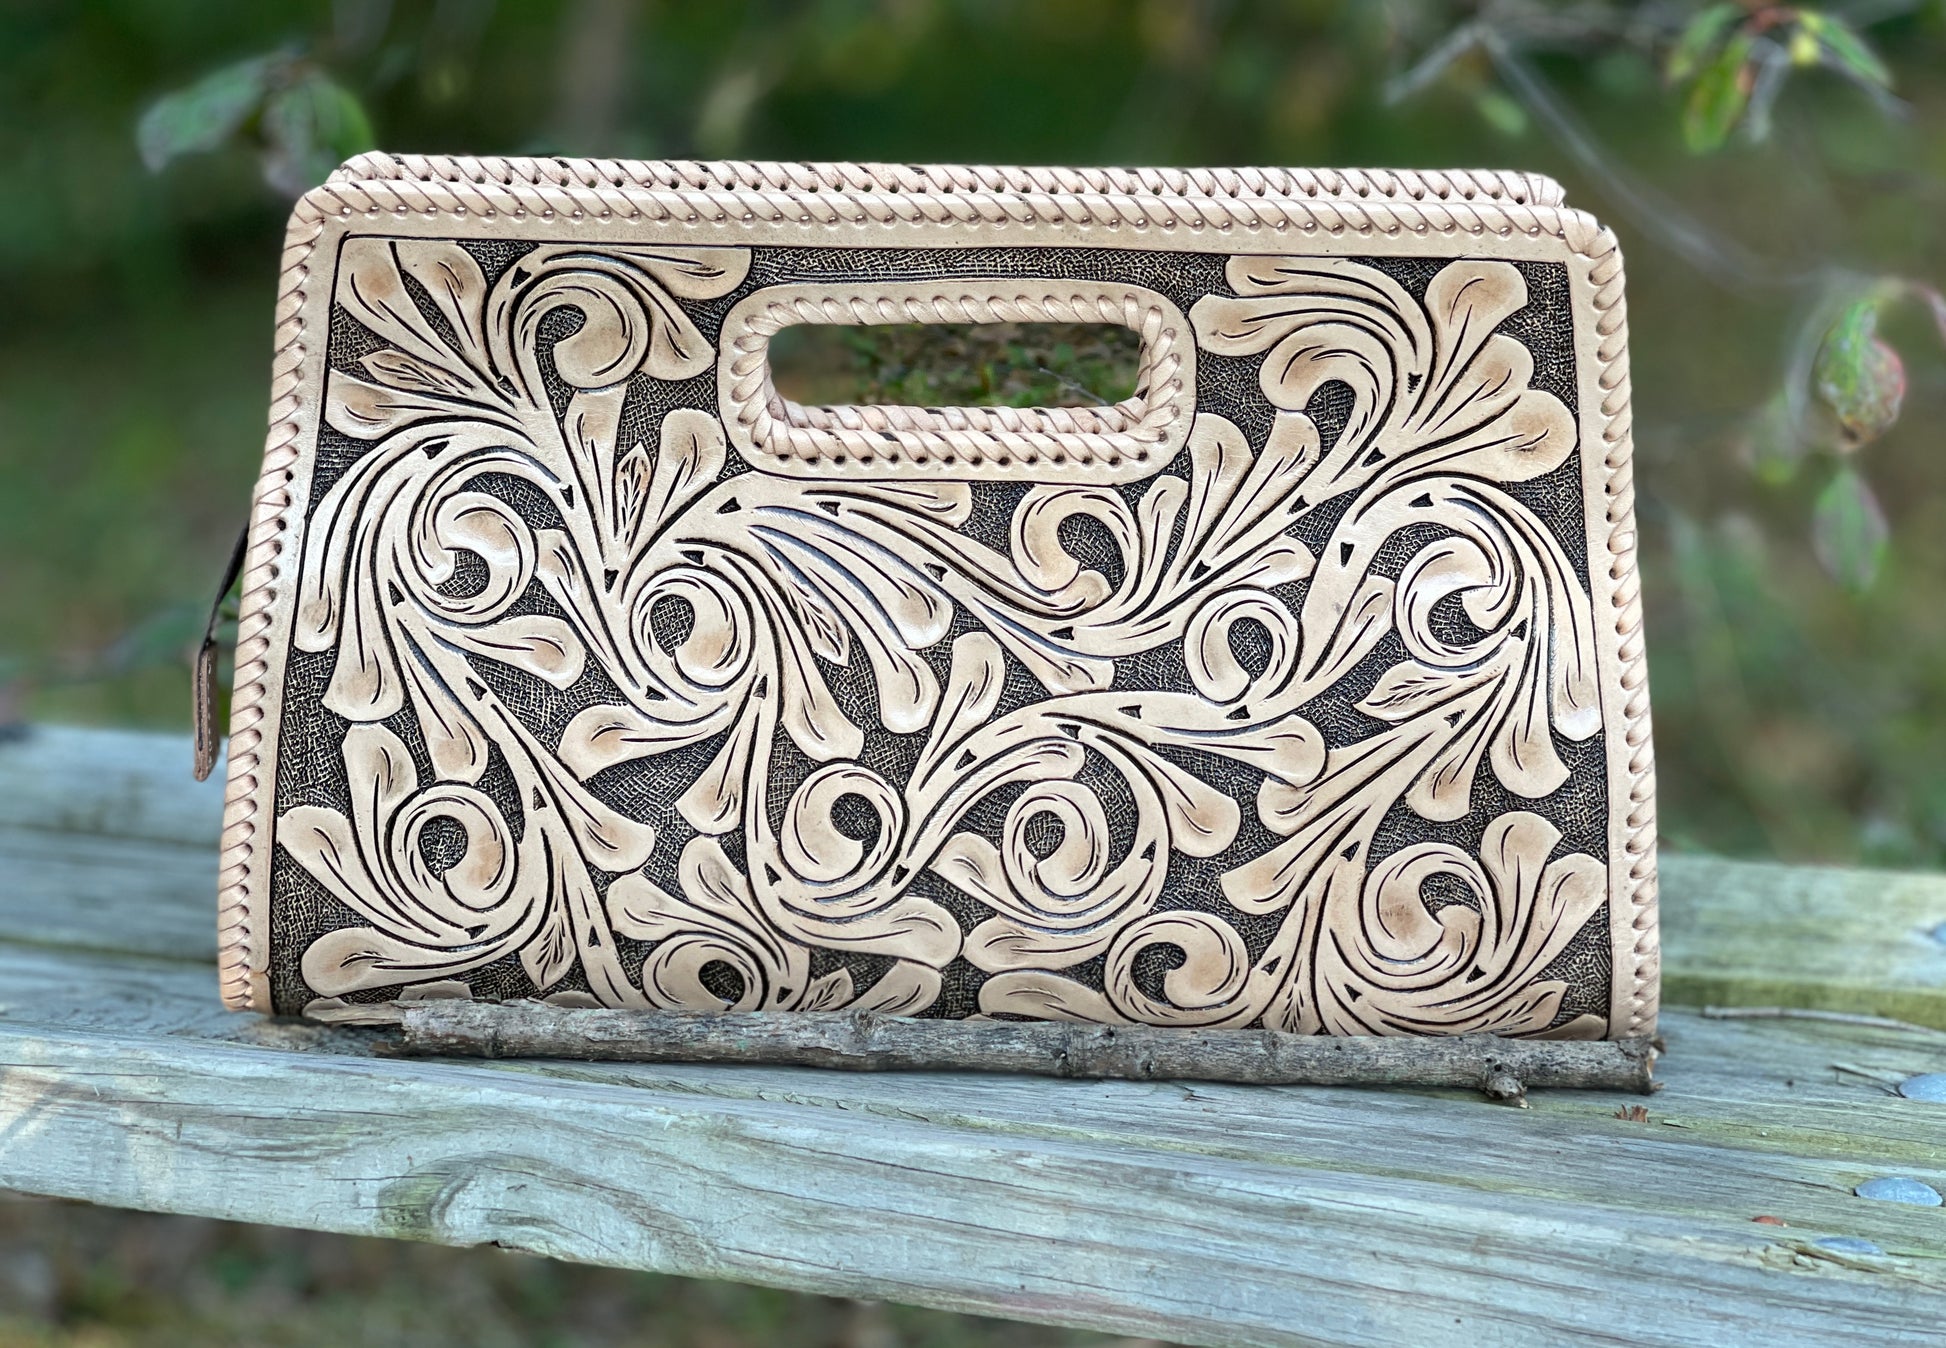 Hand-Tooled Leather Large Clutch Bag "ENVELOPE" by ALLE more Colors - ALLE Handbags